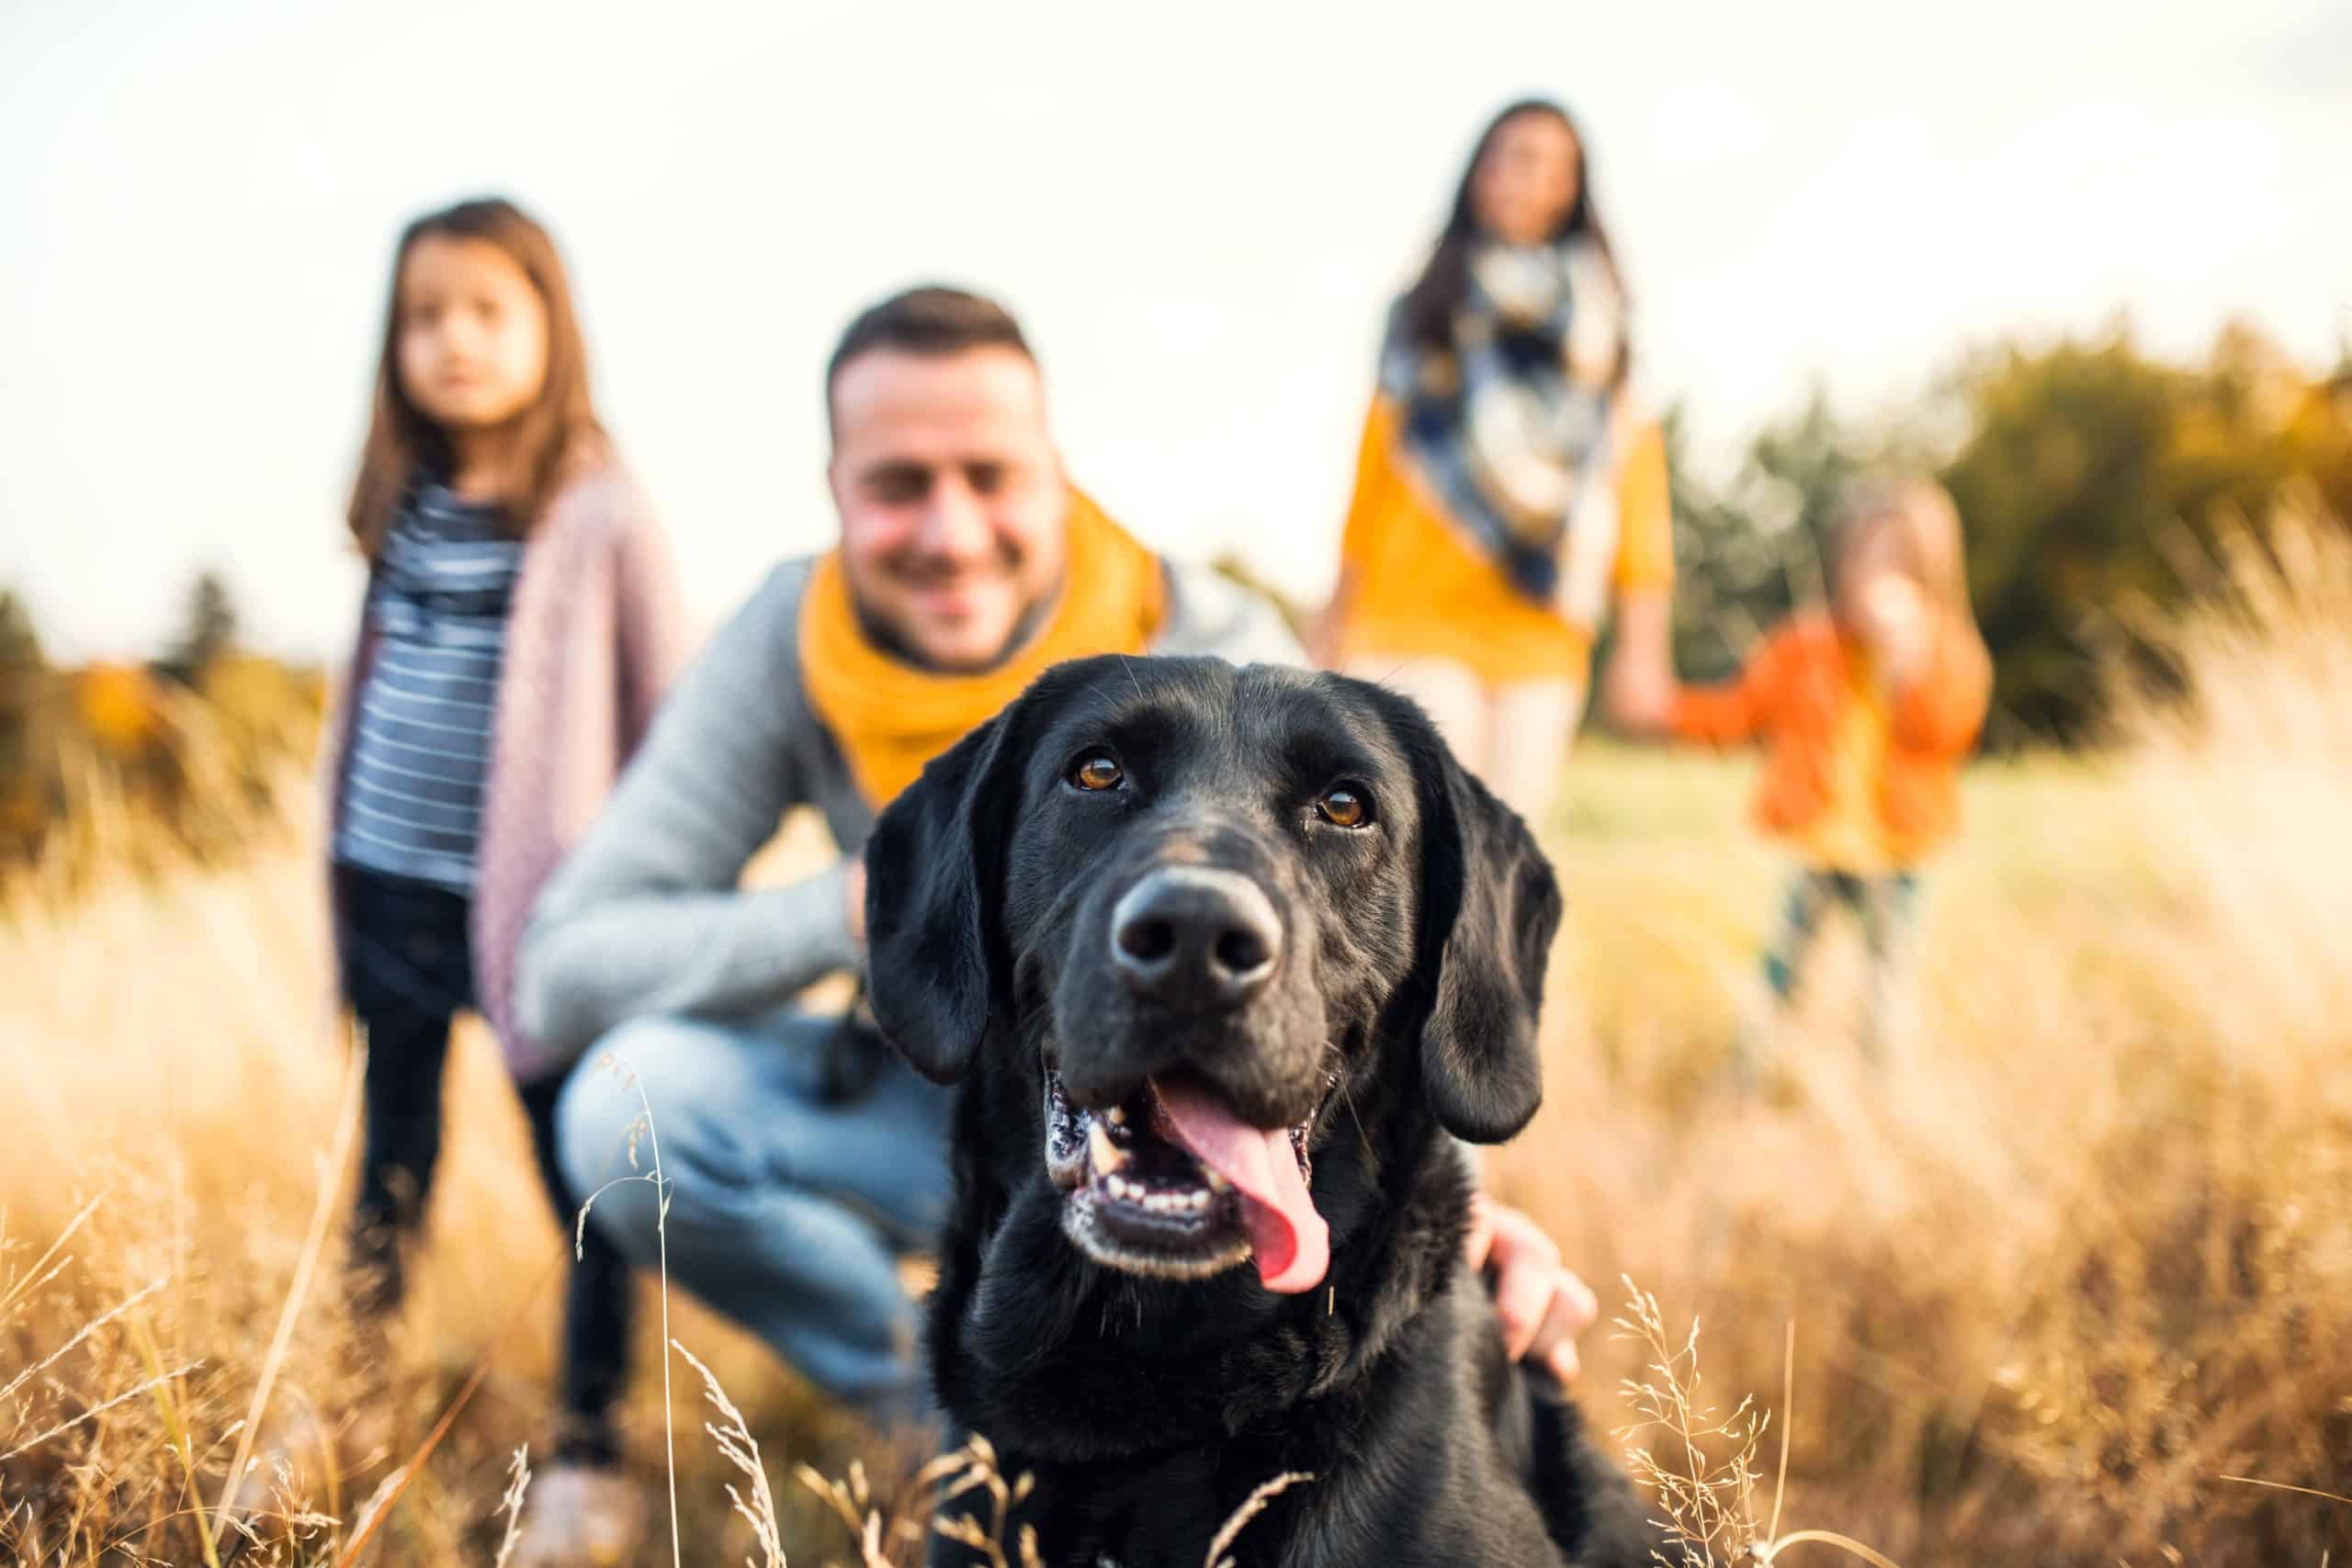 Dogs help owners be more social, active, and happy